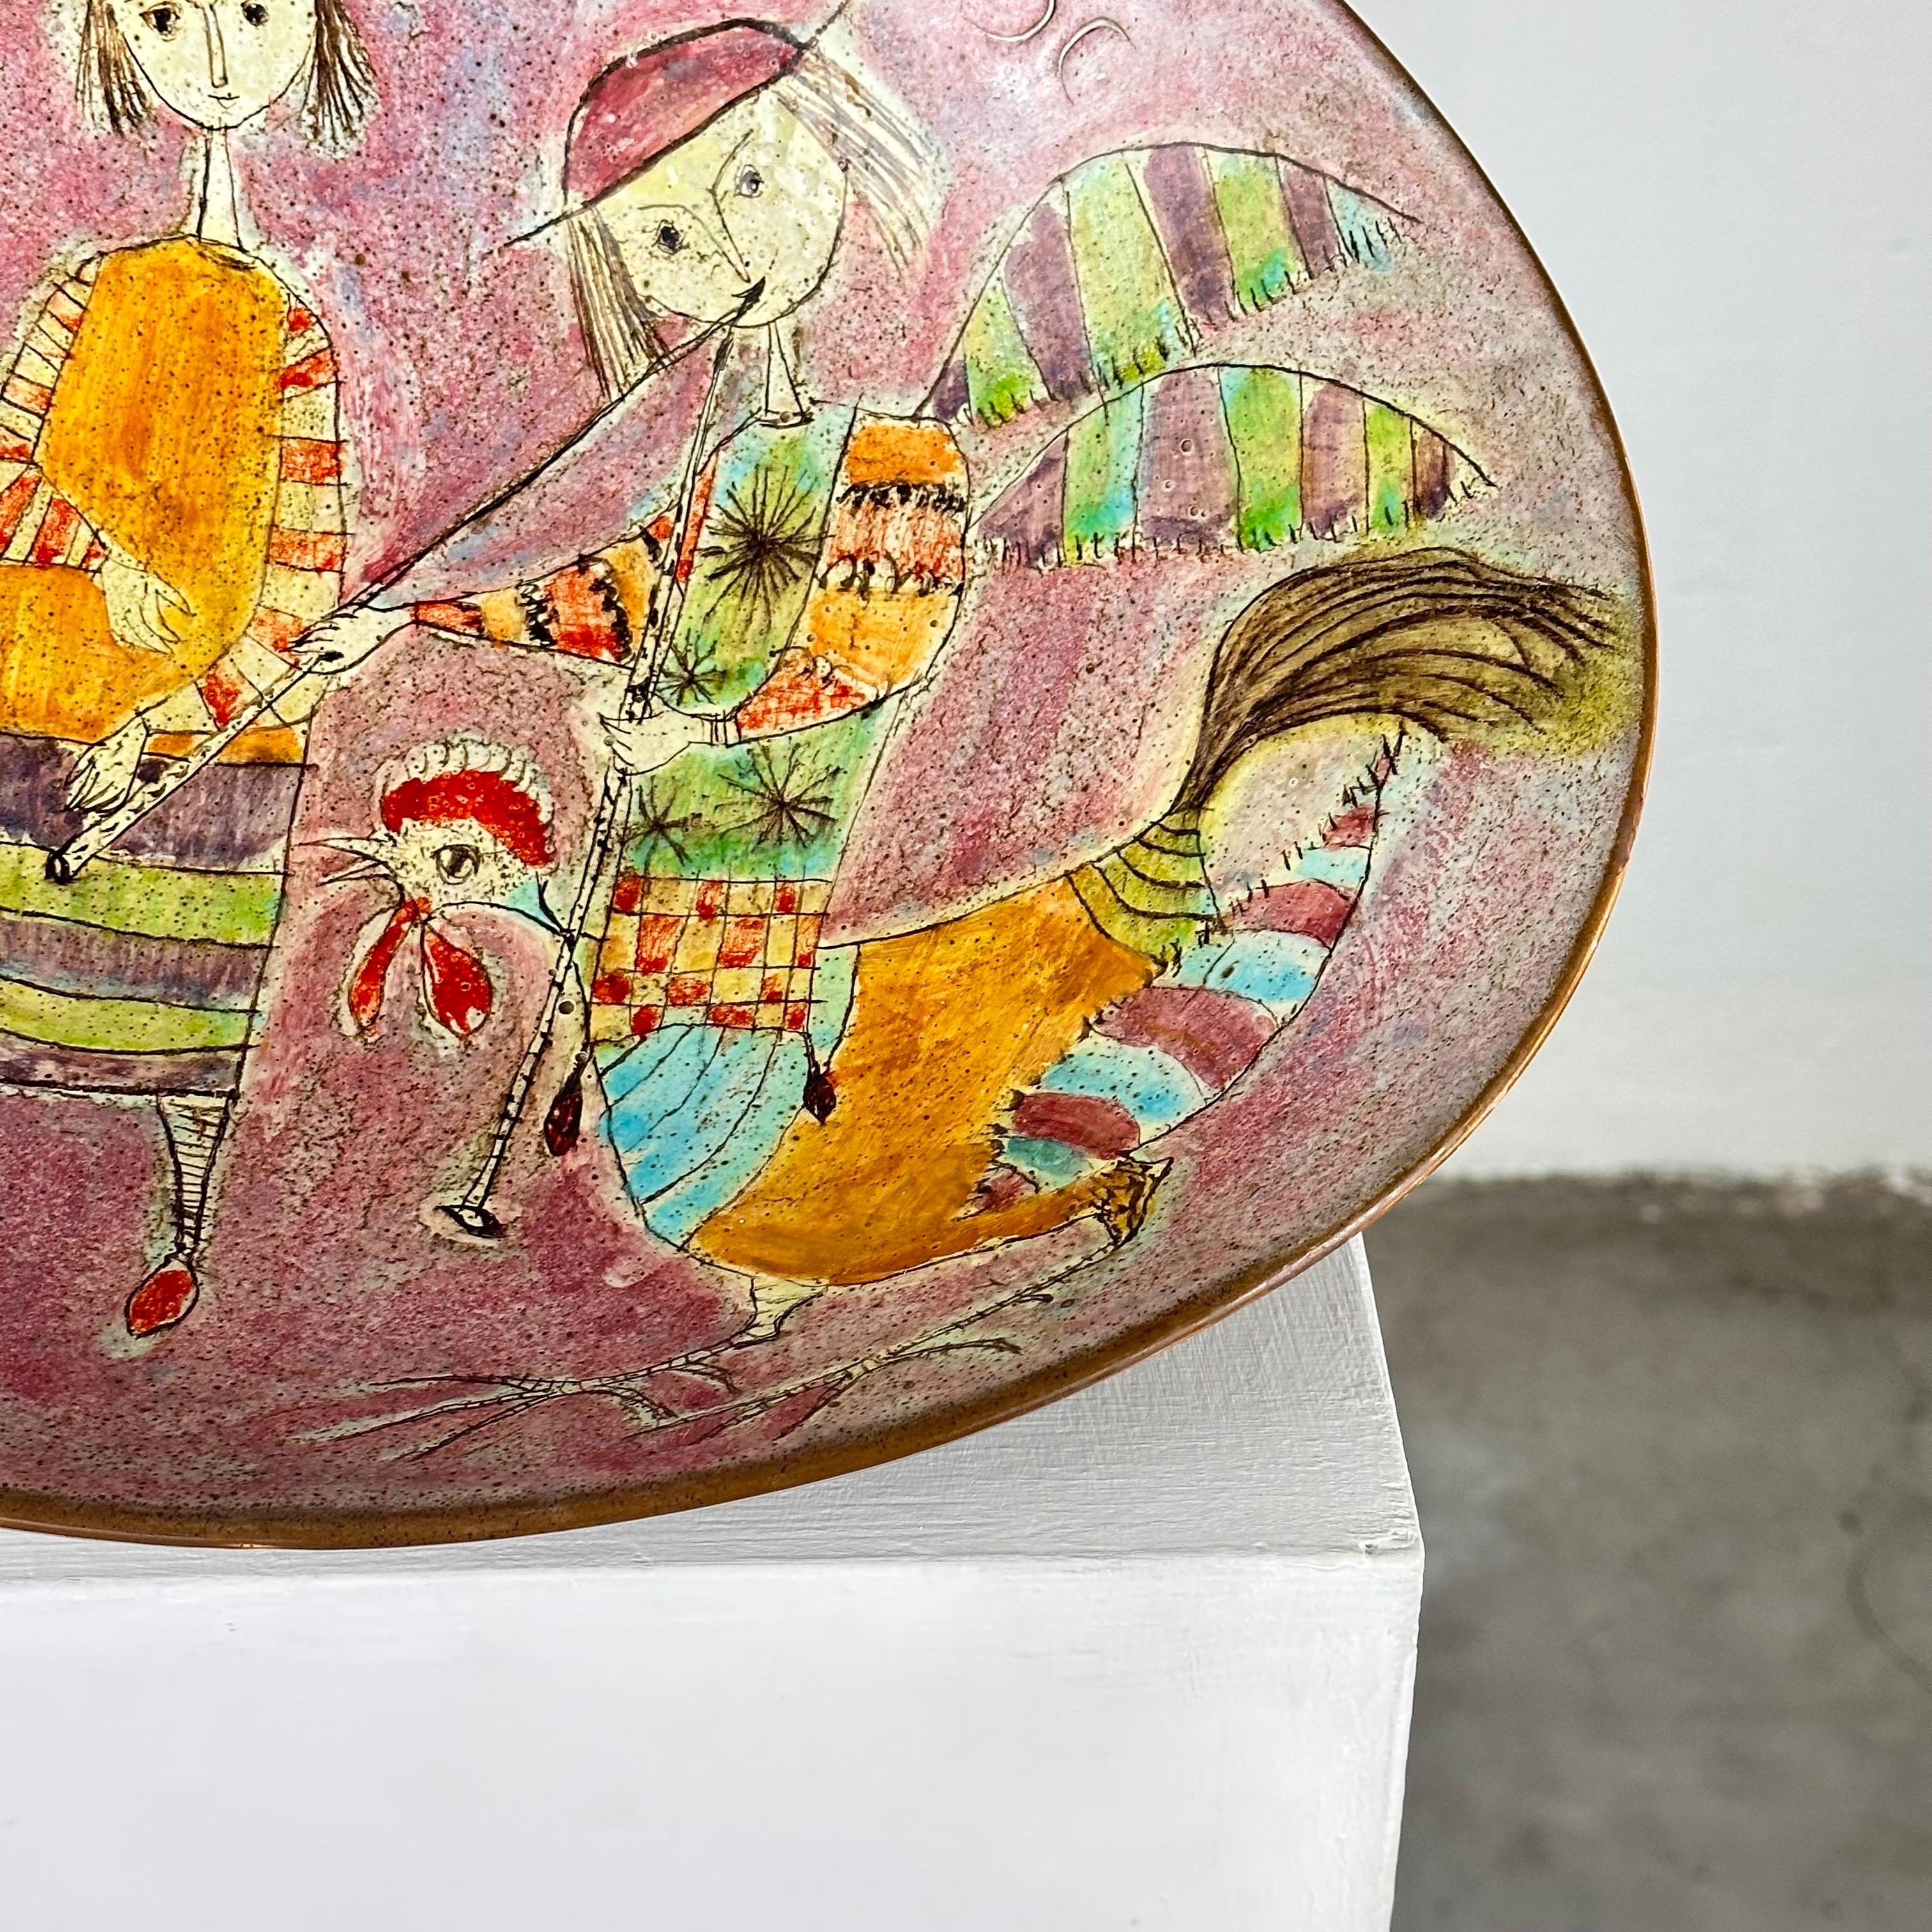 Whimsical Hand-Painted Ceramic Plate by Baratti Pesaro, 1970s  For Sale 1